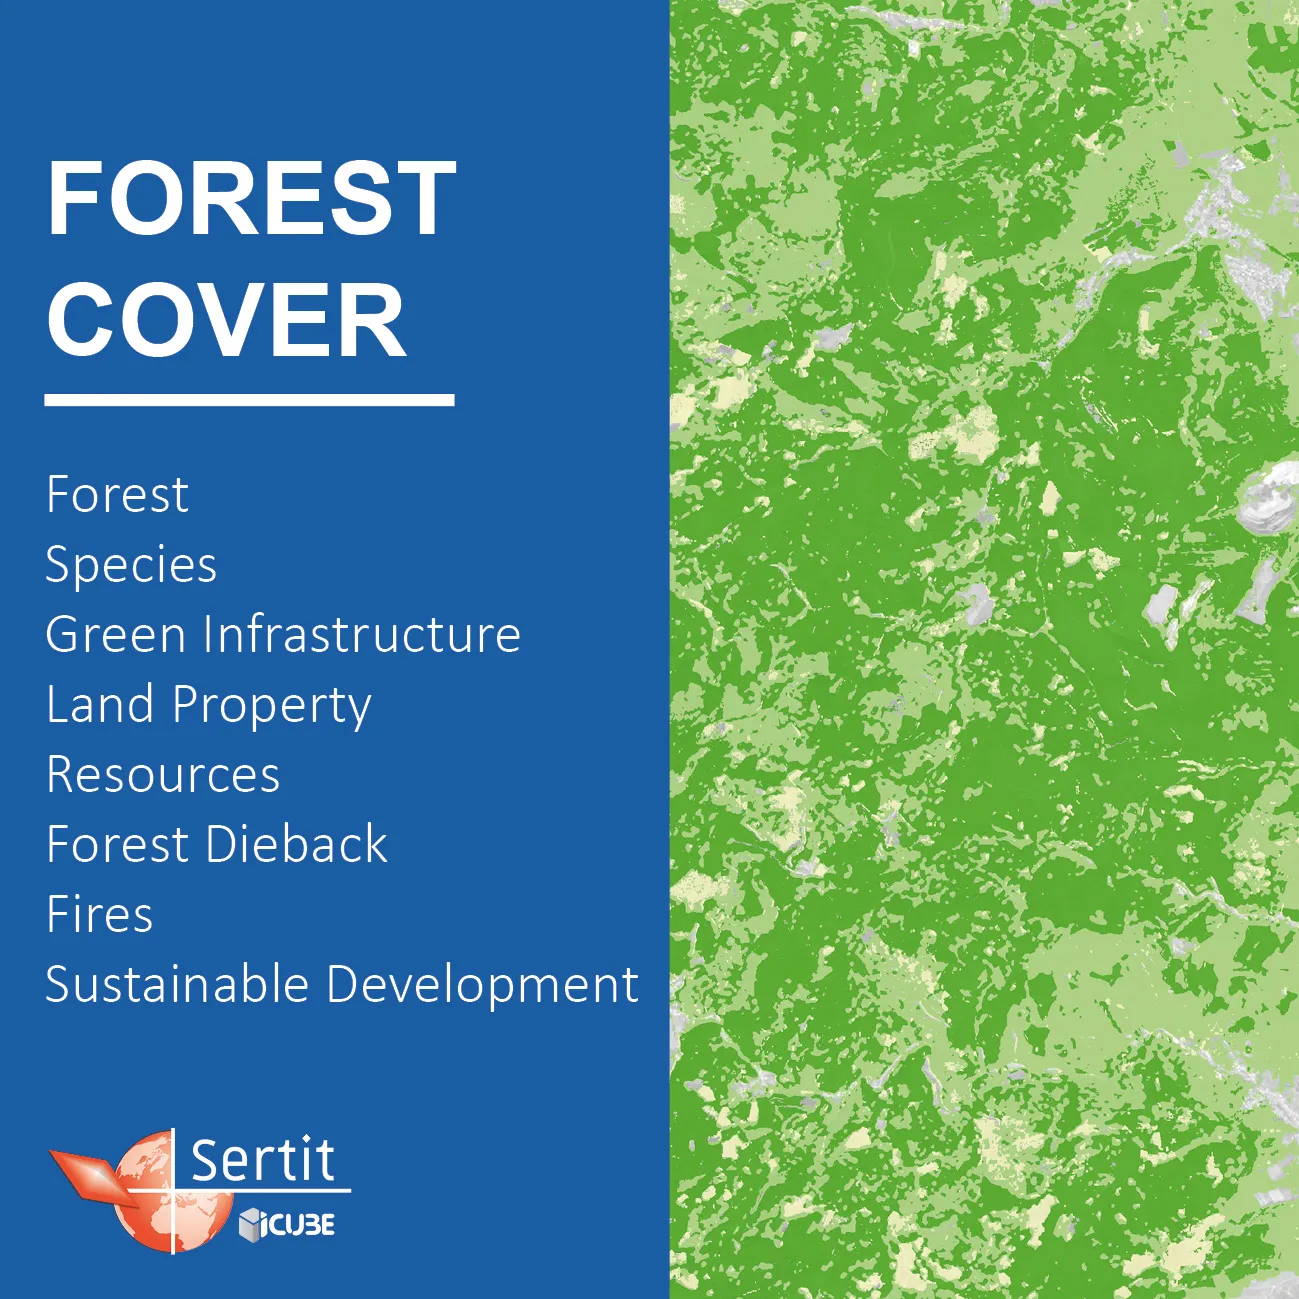 Forest Cover: Forest, Species, Green Infrastructure, Land Property, Resources, Forest Dieback, Fires, Sustainable Development